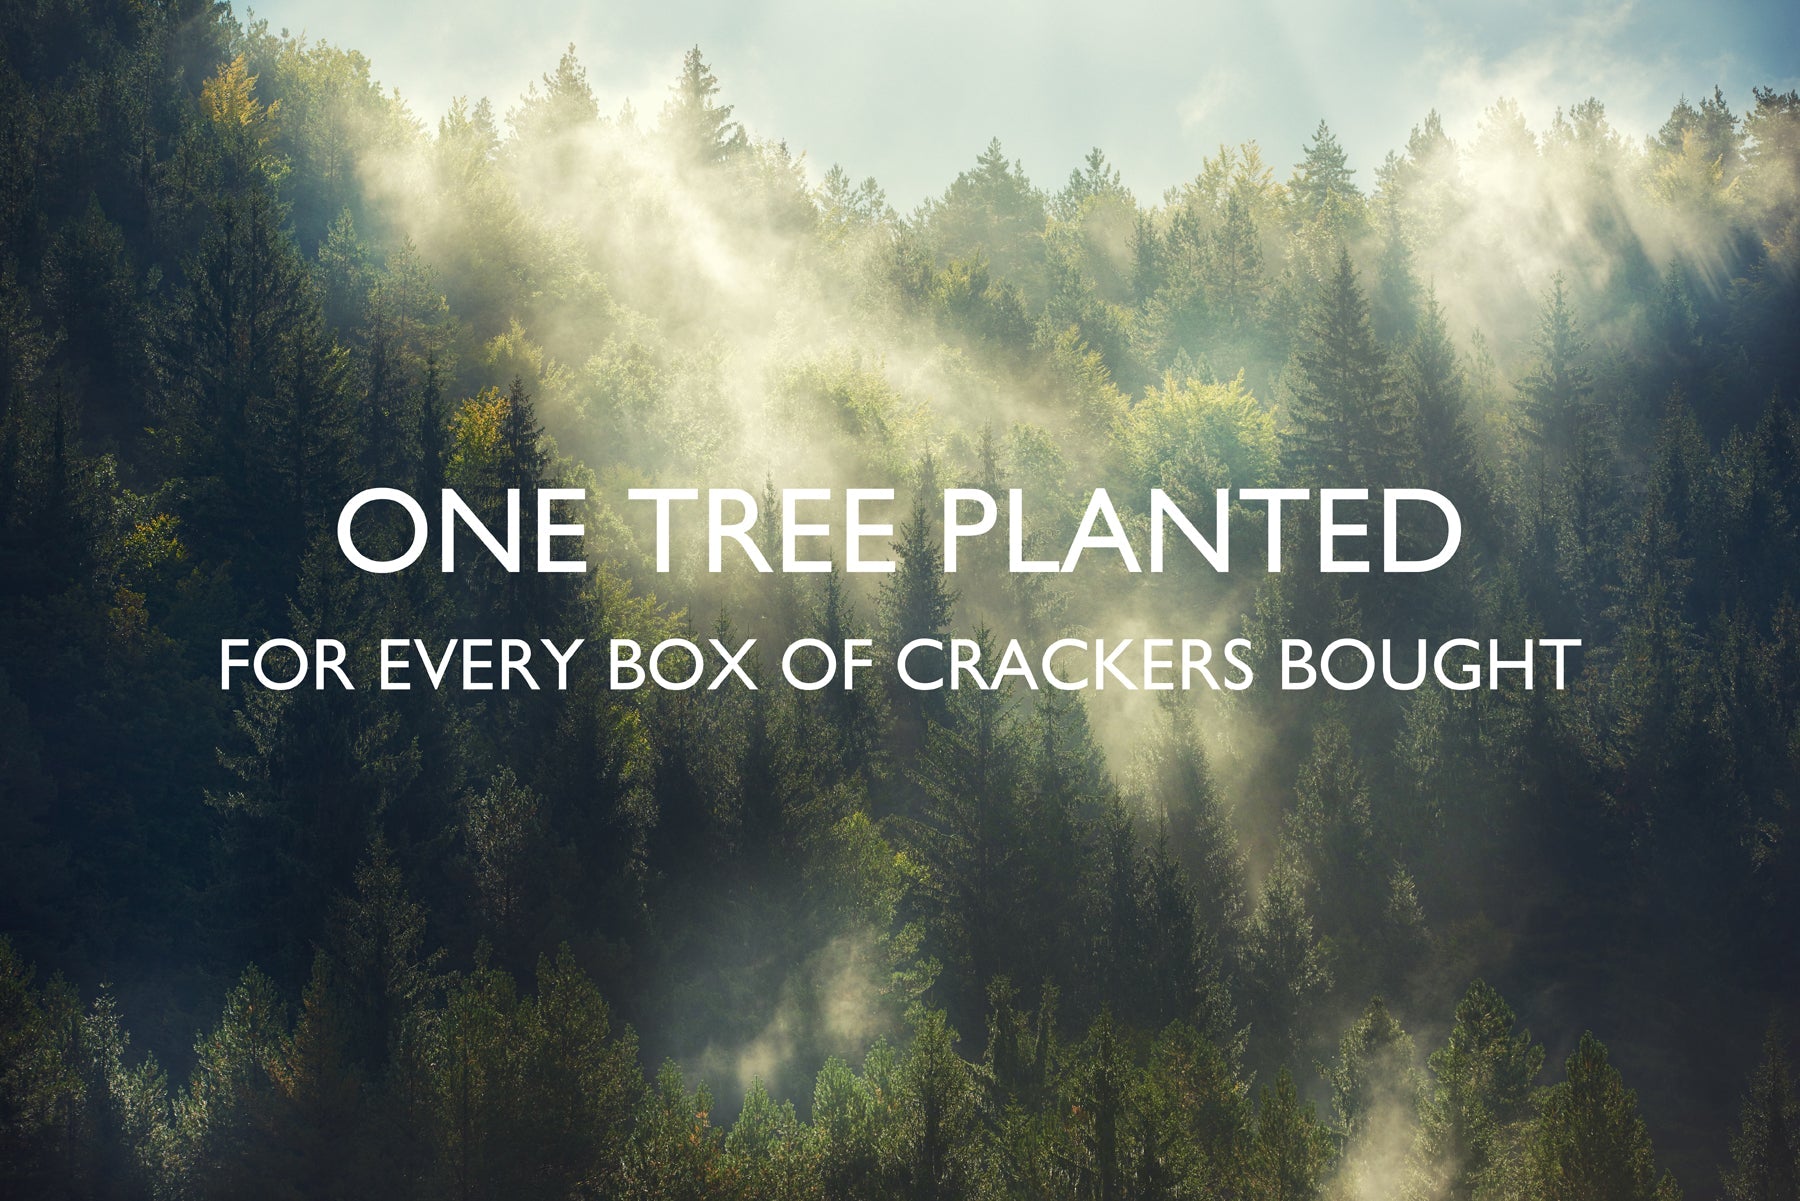 AAA_onetreeplantedforeveryboxofcrackersbought_6by4_c7fdc38d-7642-4b7e-a239-721952c85a23.jpg